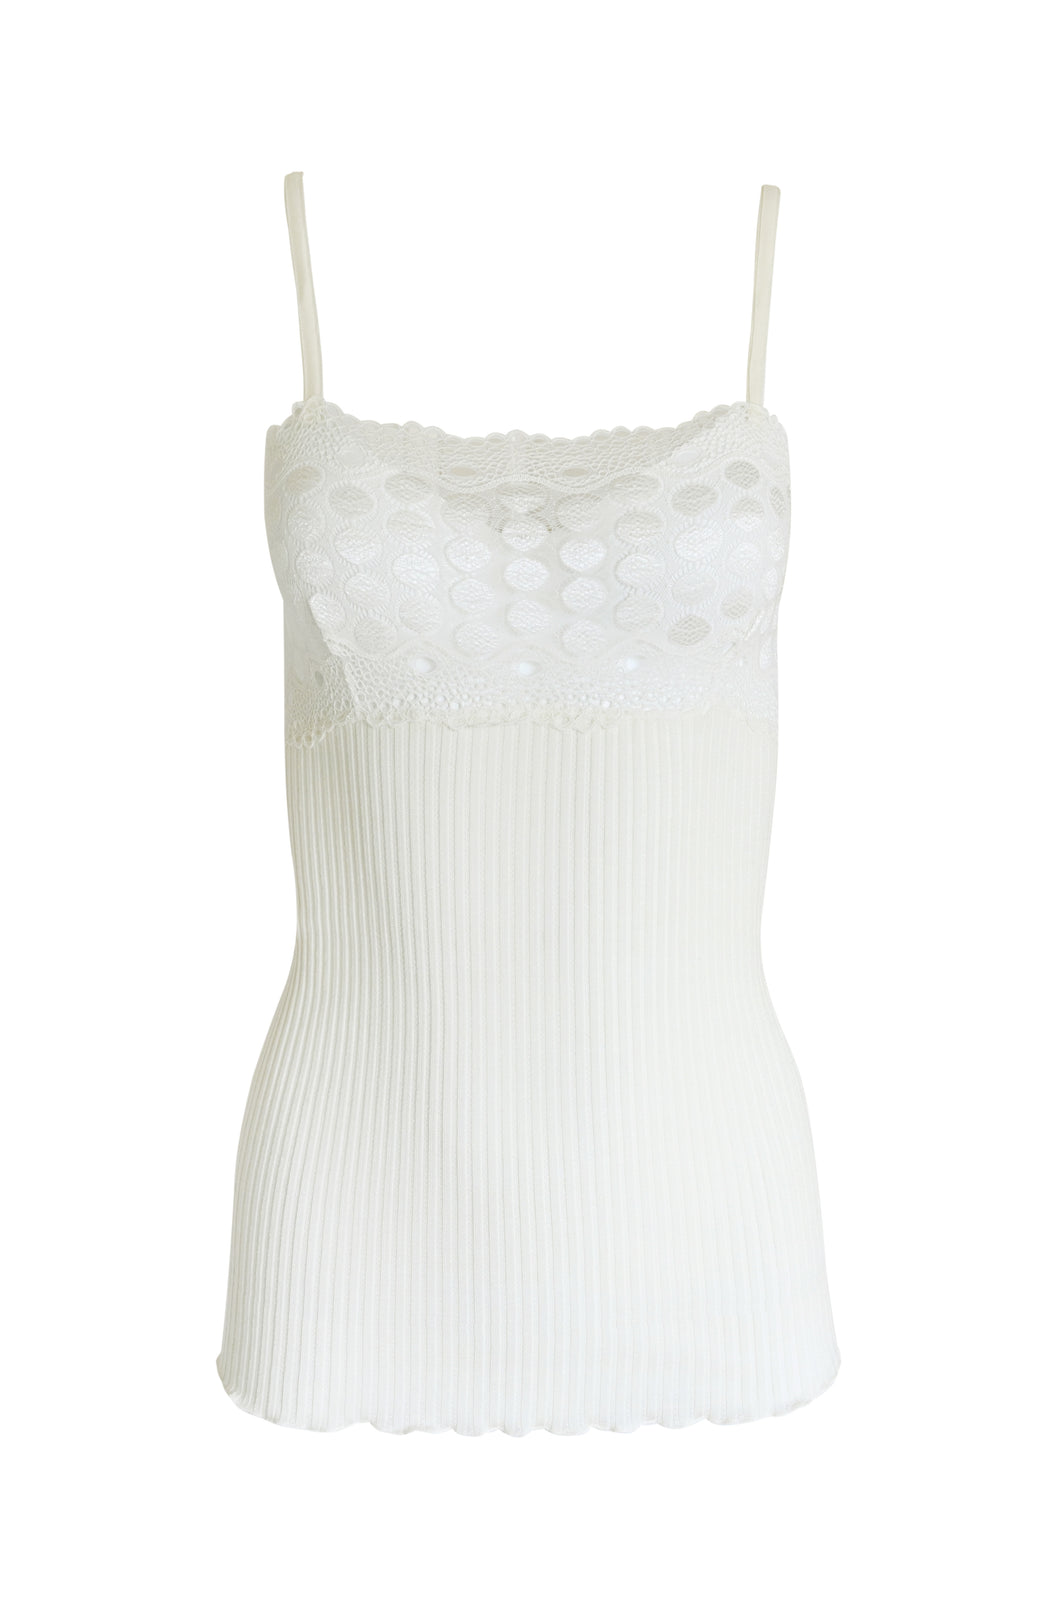 EGI Exclusive Women's Merino Wool Blend Spaghetti Straps Lace-Trimmed Camisole. Proudly Made in Italy.